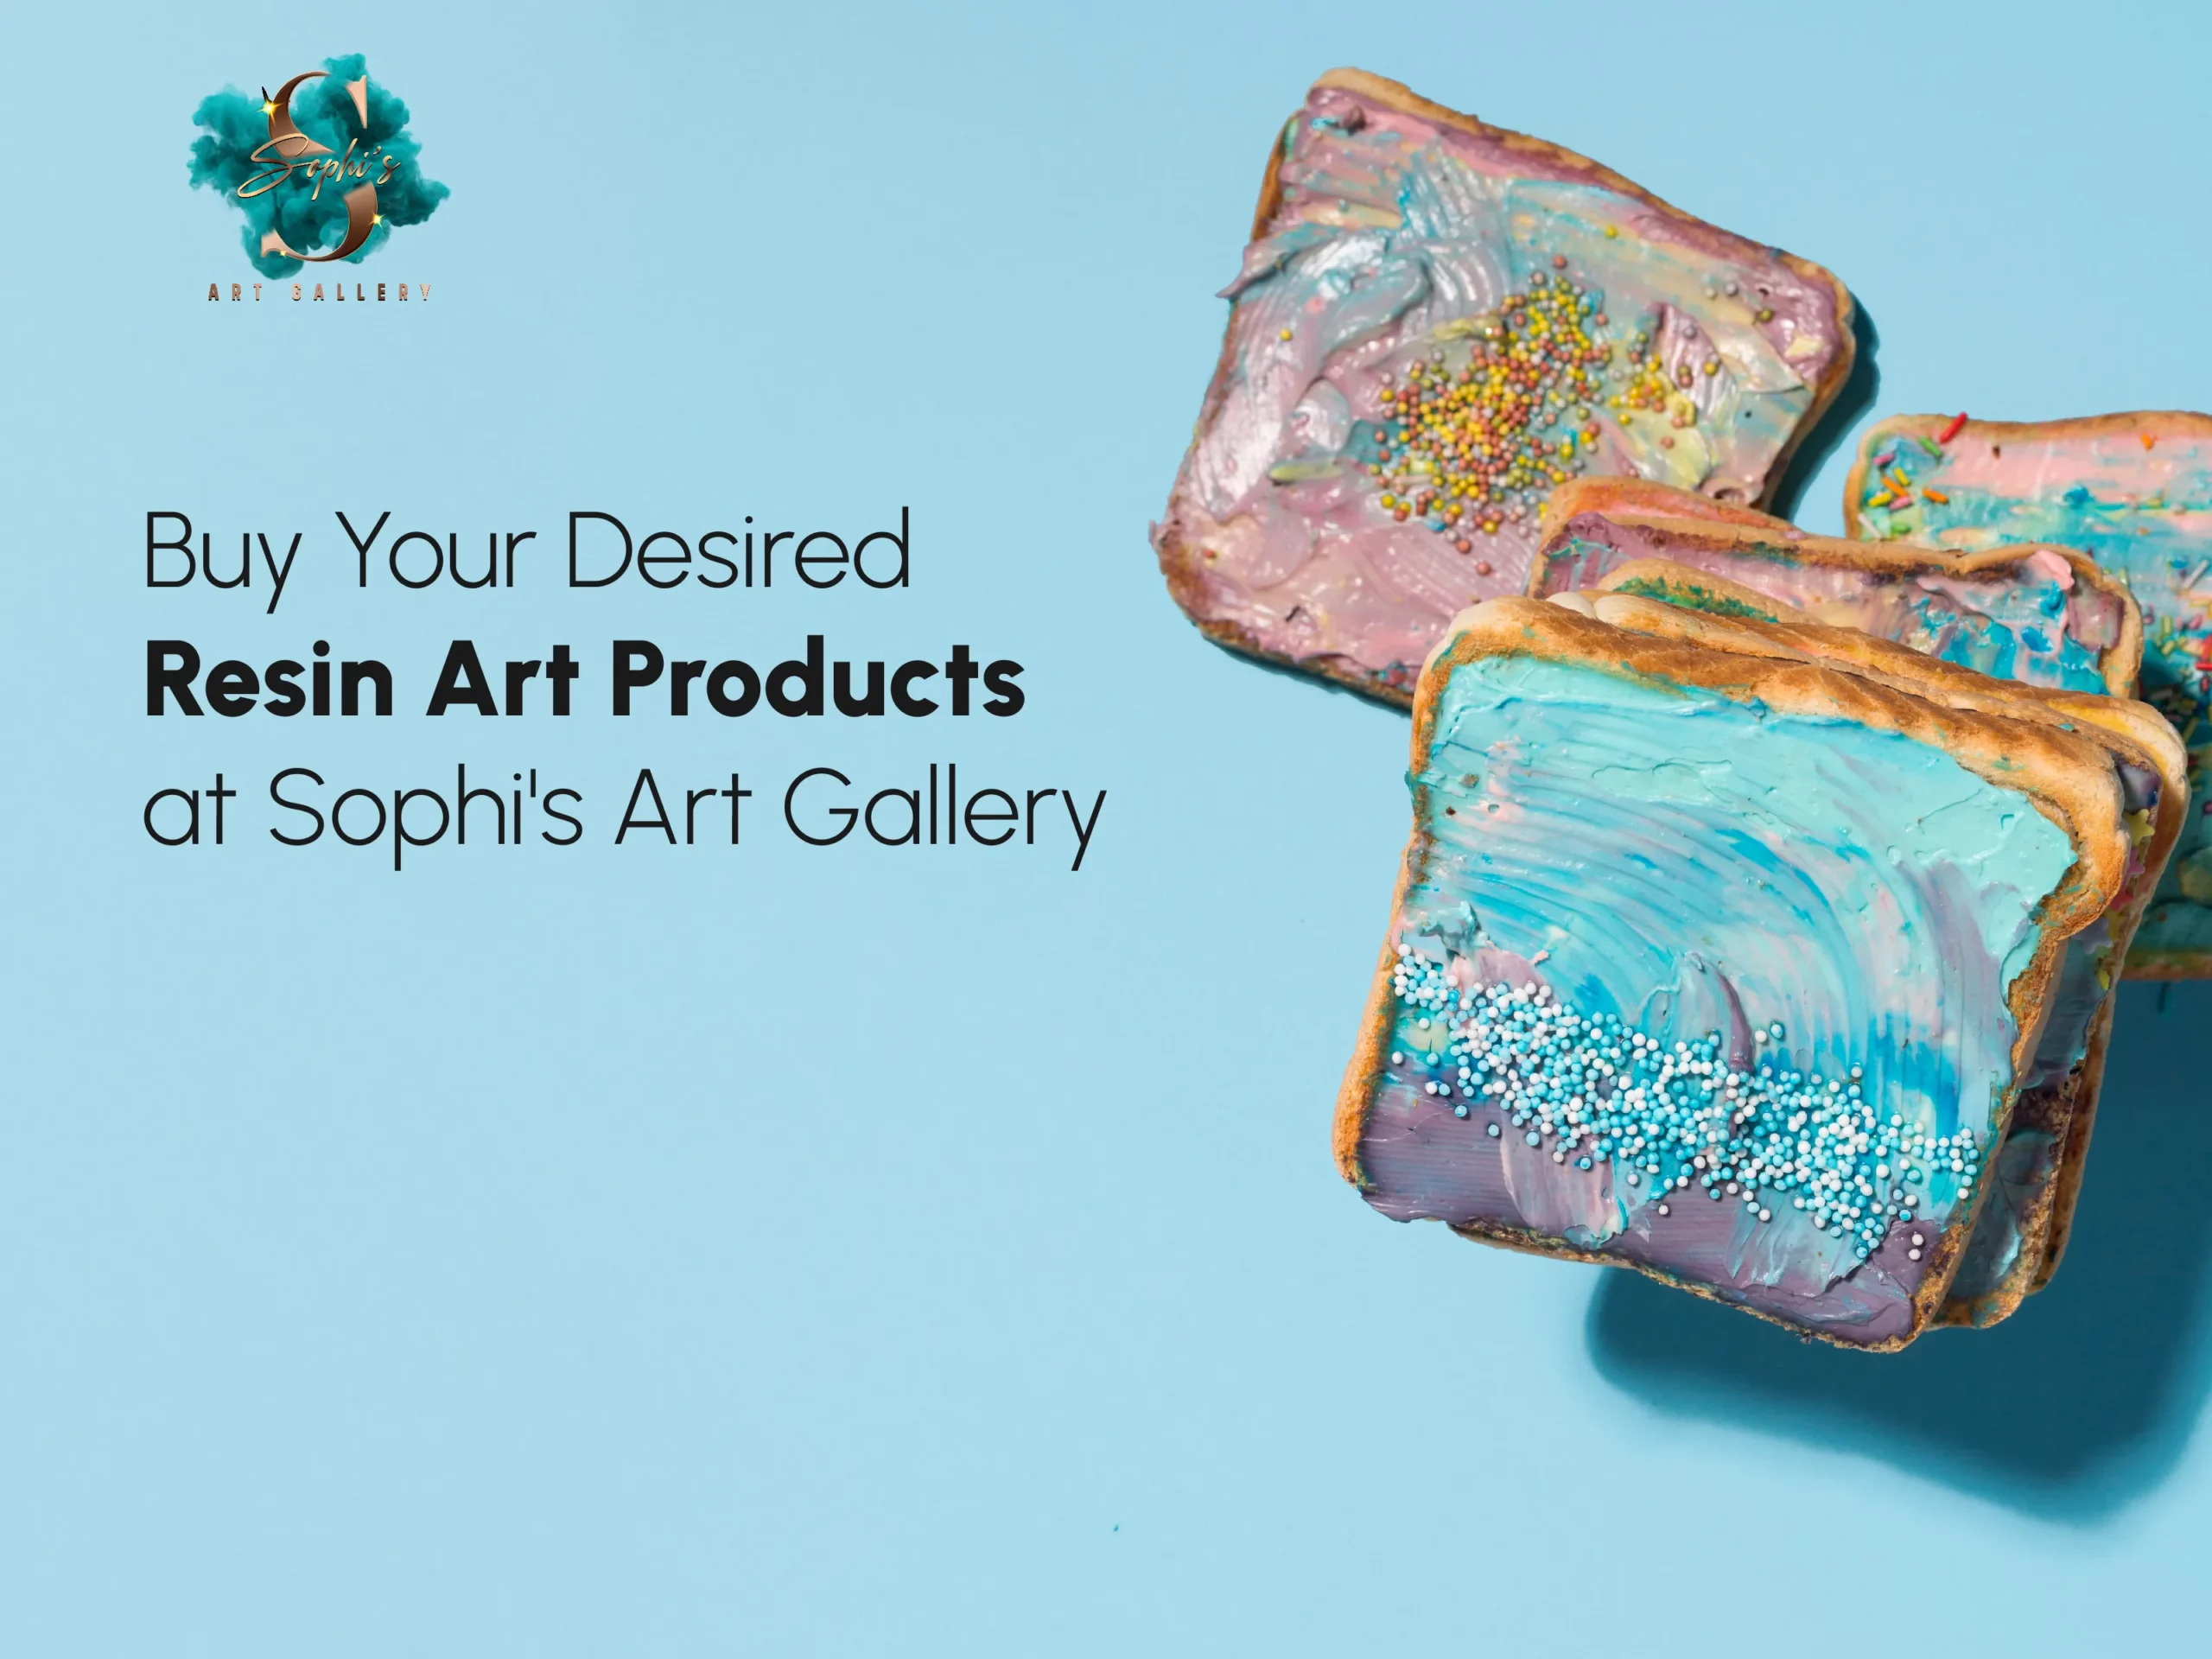 Buy Your Desired Resin Art Products at Sophi's Art Gallery